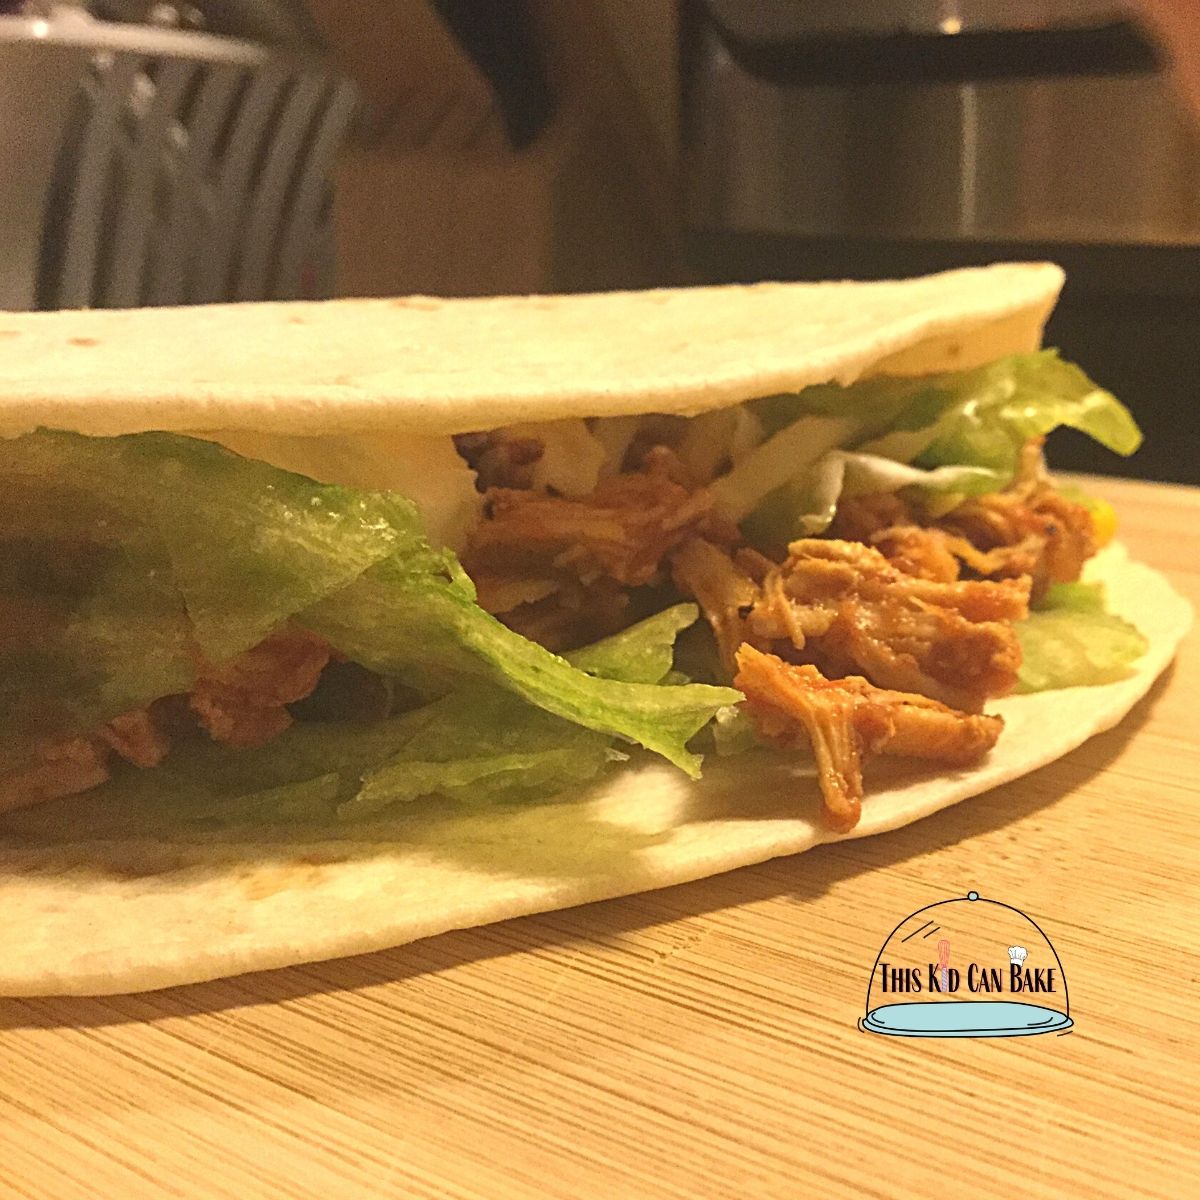 A picture of shredded chicken on a tortilla with lettuce and tomato.